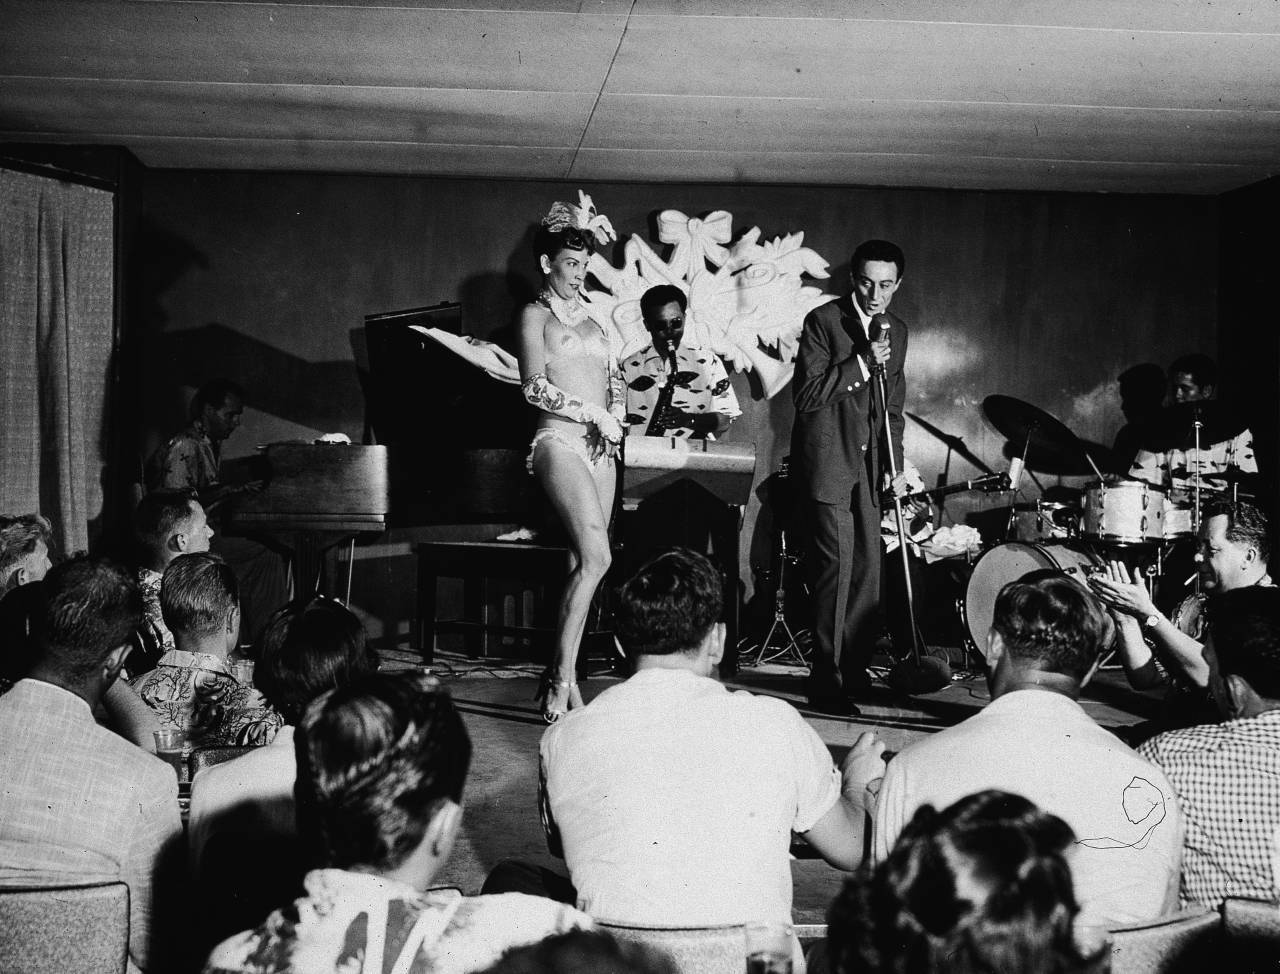 American comedian Lenny Bruce (1926 - 1966) performs on stage with exotic dancer Windee Gayle and a saxophonist at the Orchid Room, Waikiki, 1950s. (Photo by Hulton Archive/Getty Images)